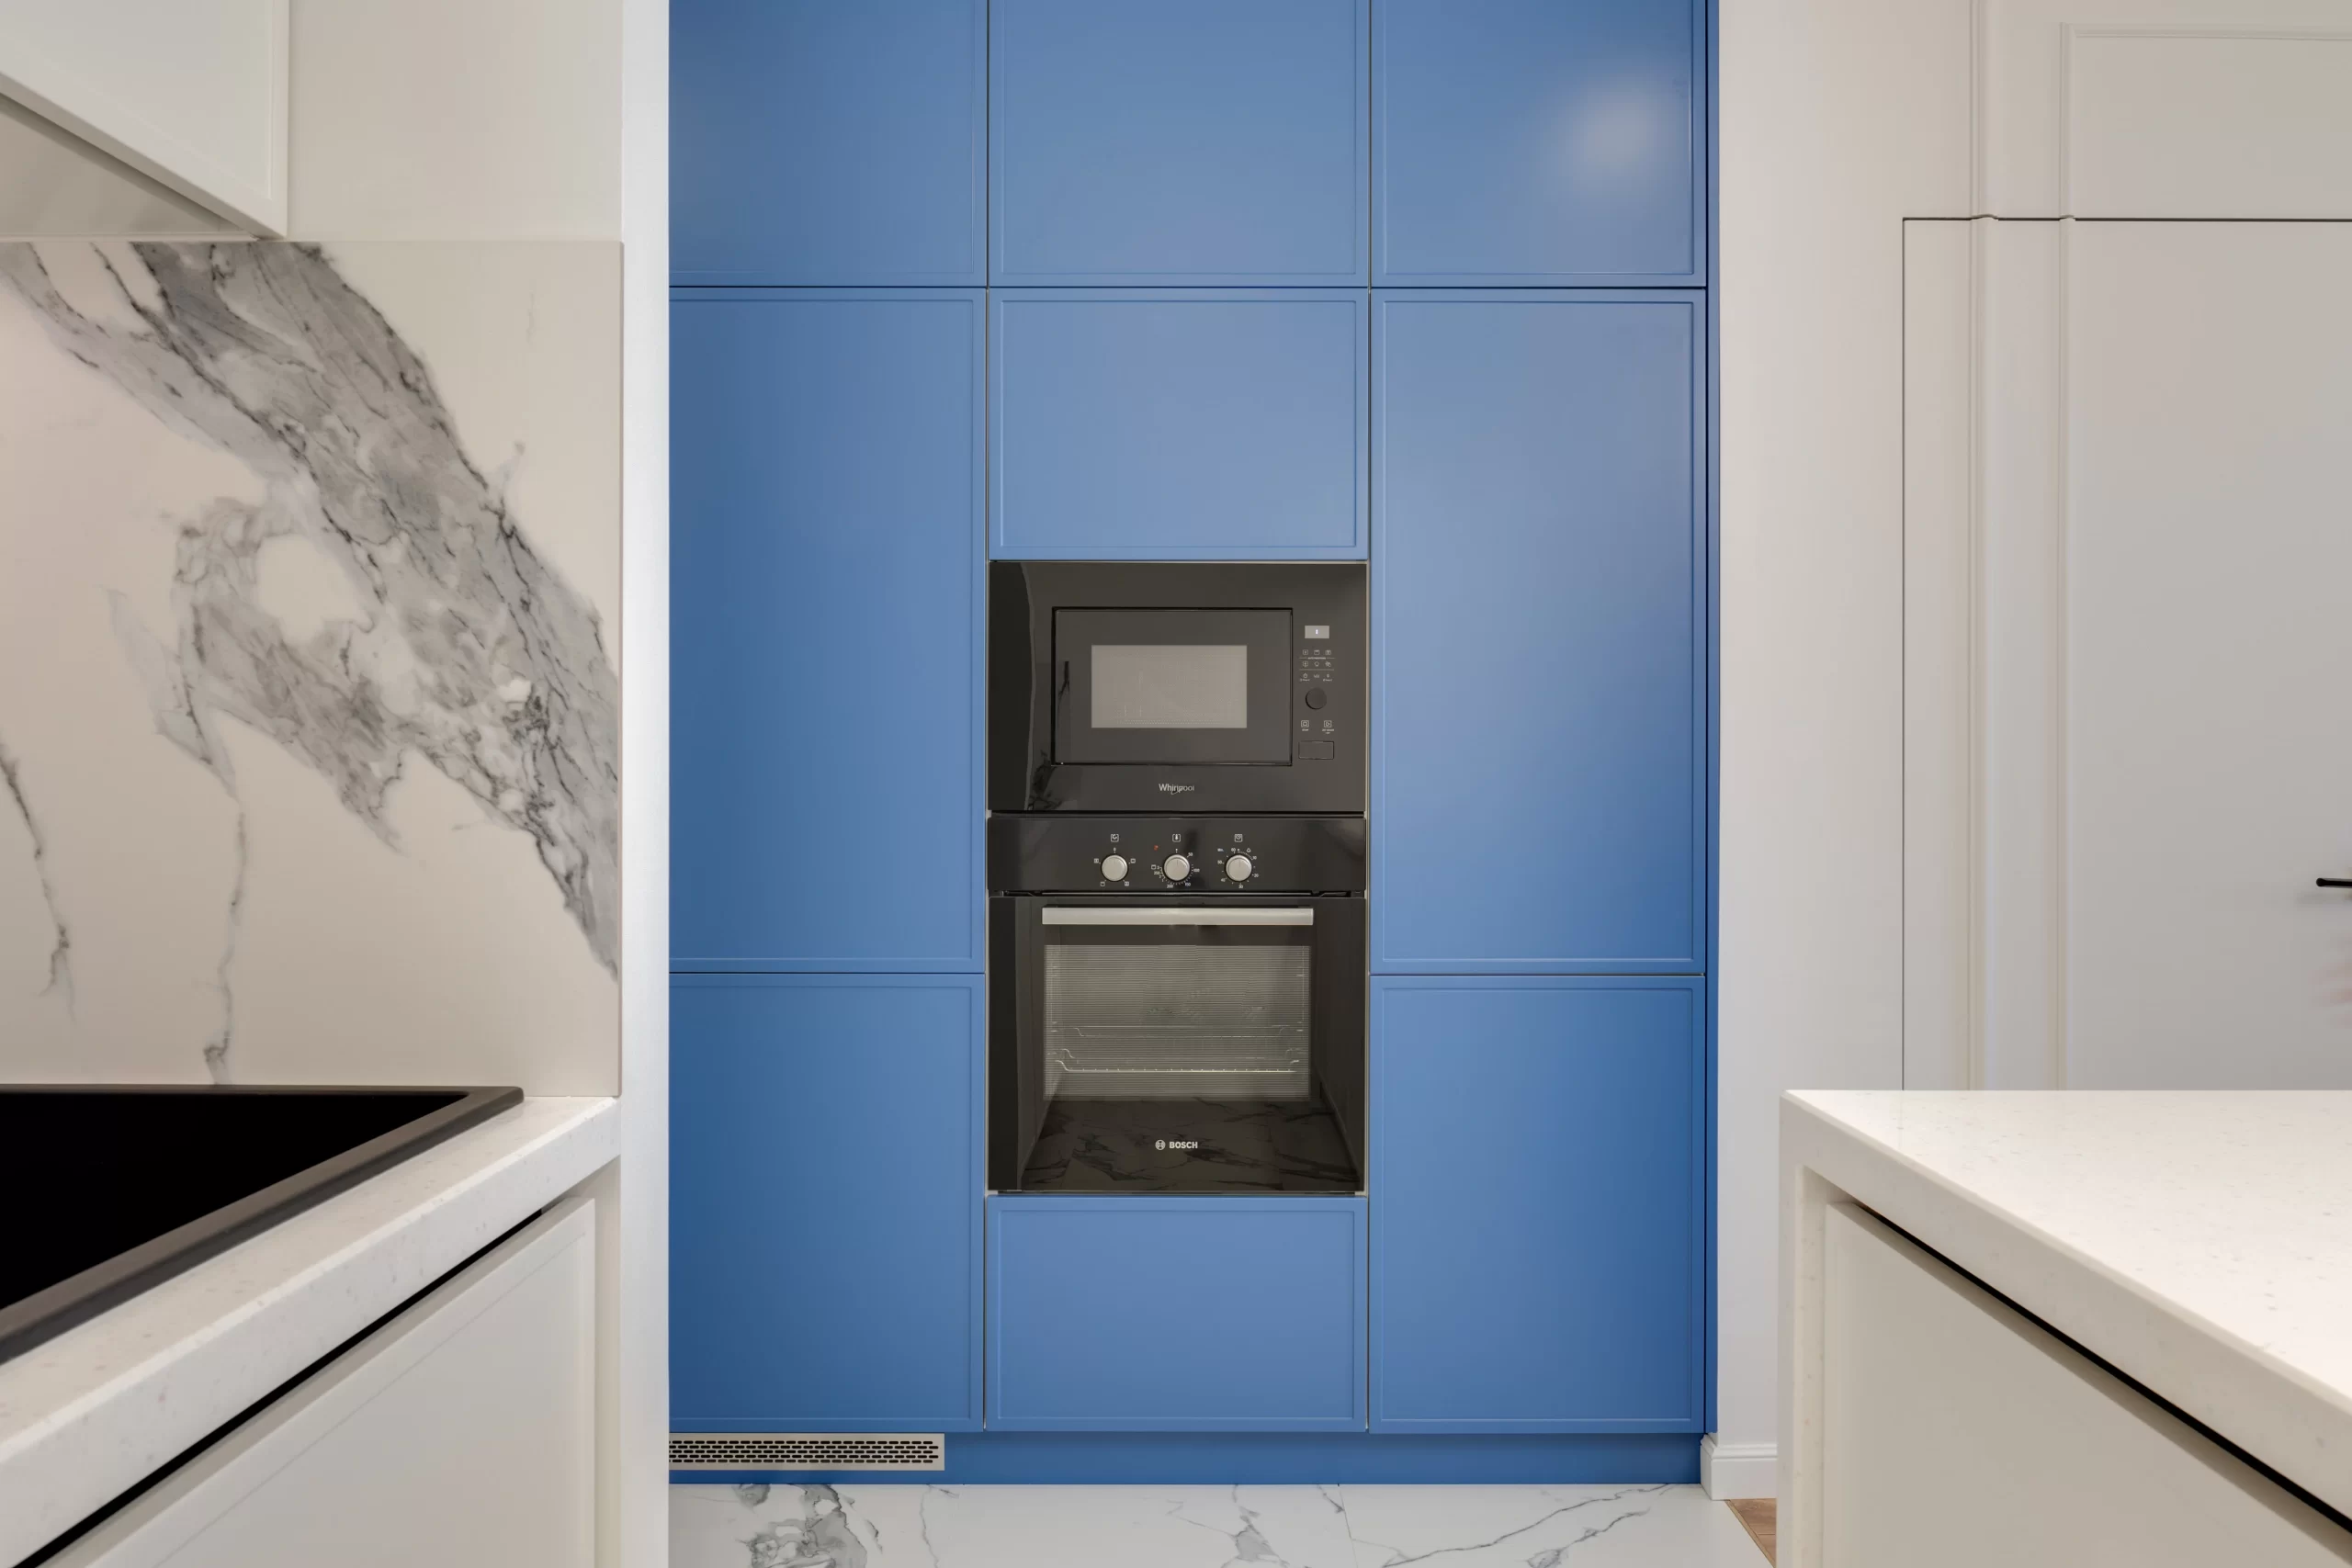 Microwave and oven placed in the wall cabinets